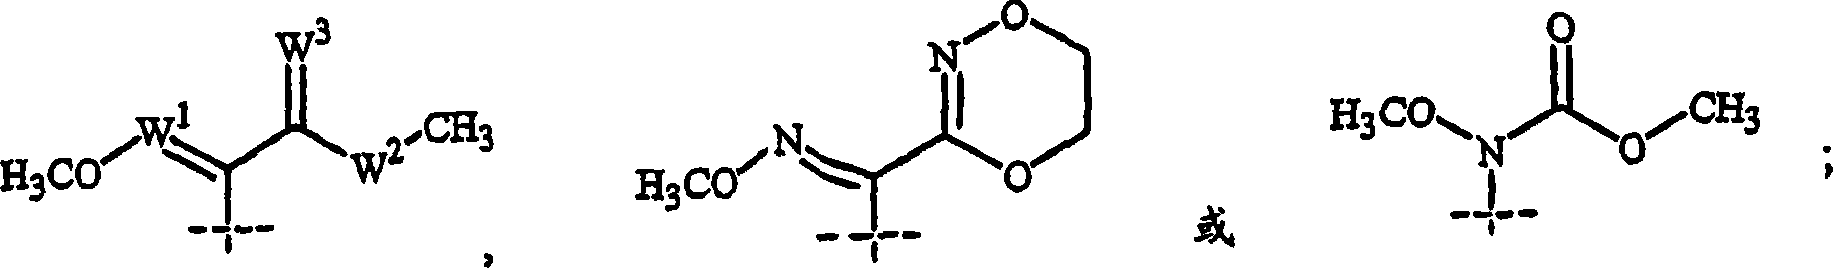 Fungicidal mixtures of thiophene derivative